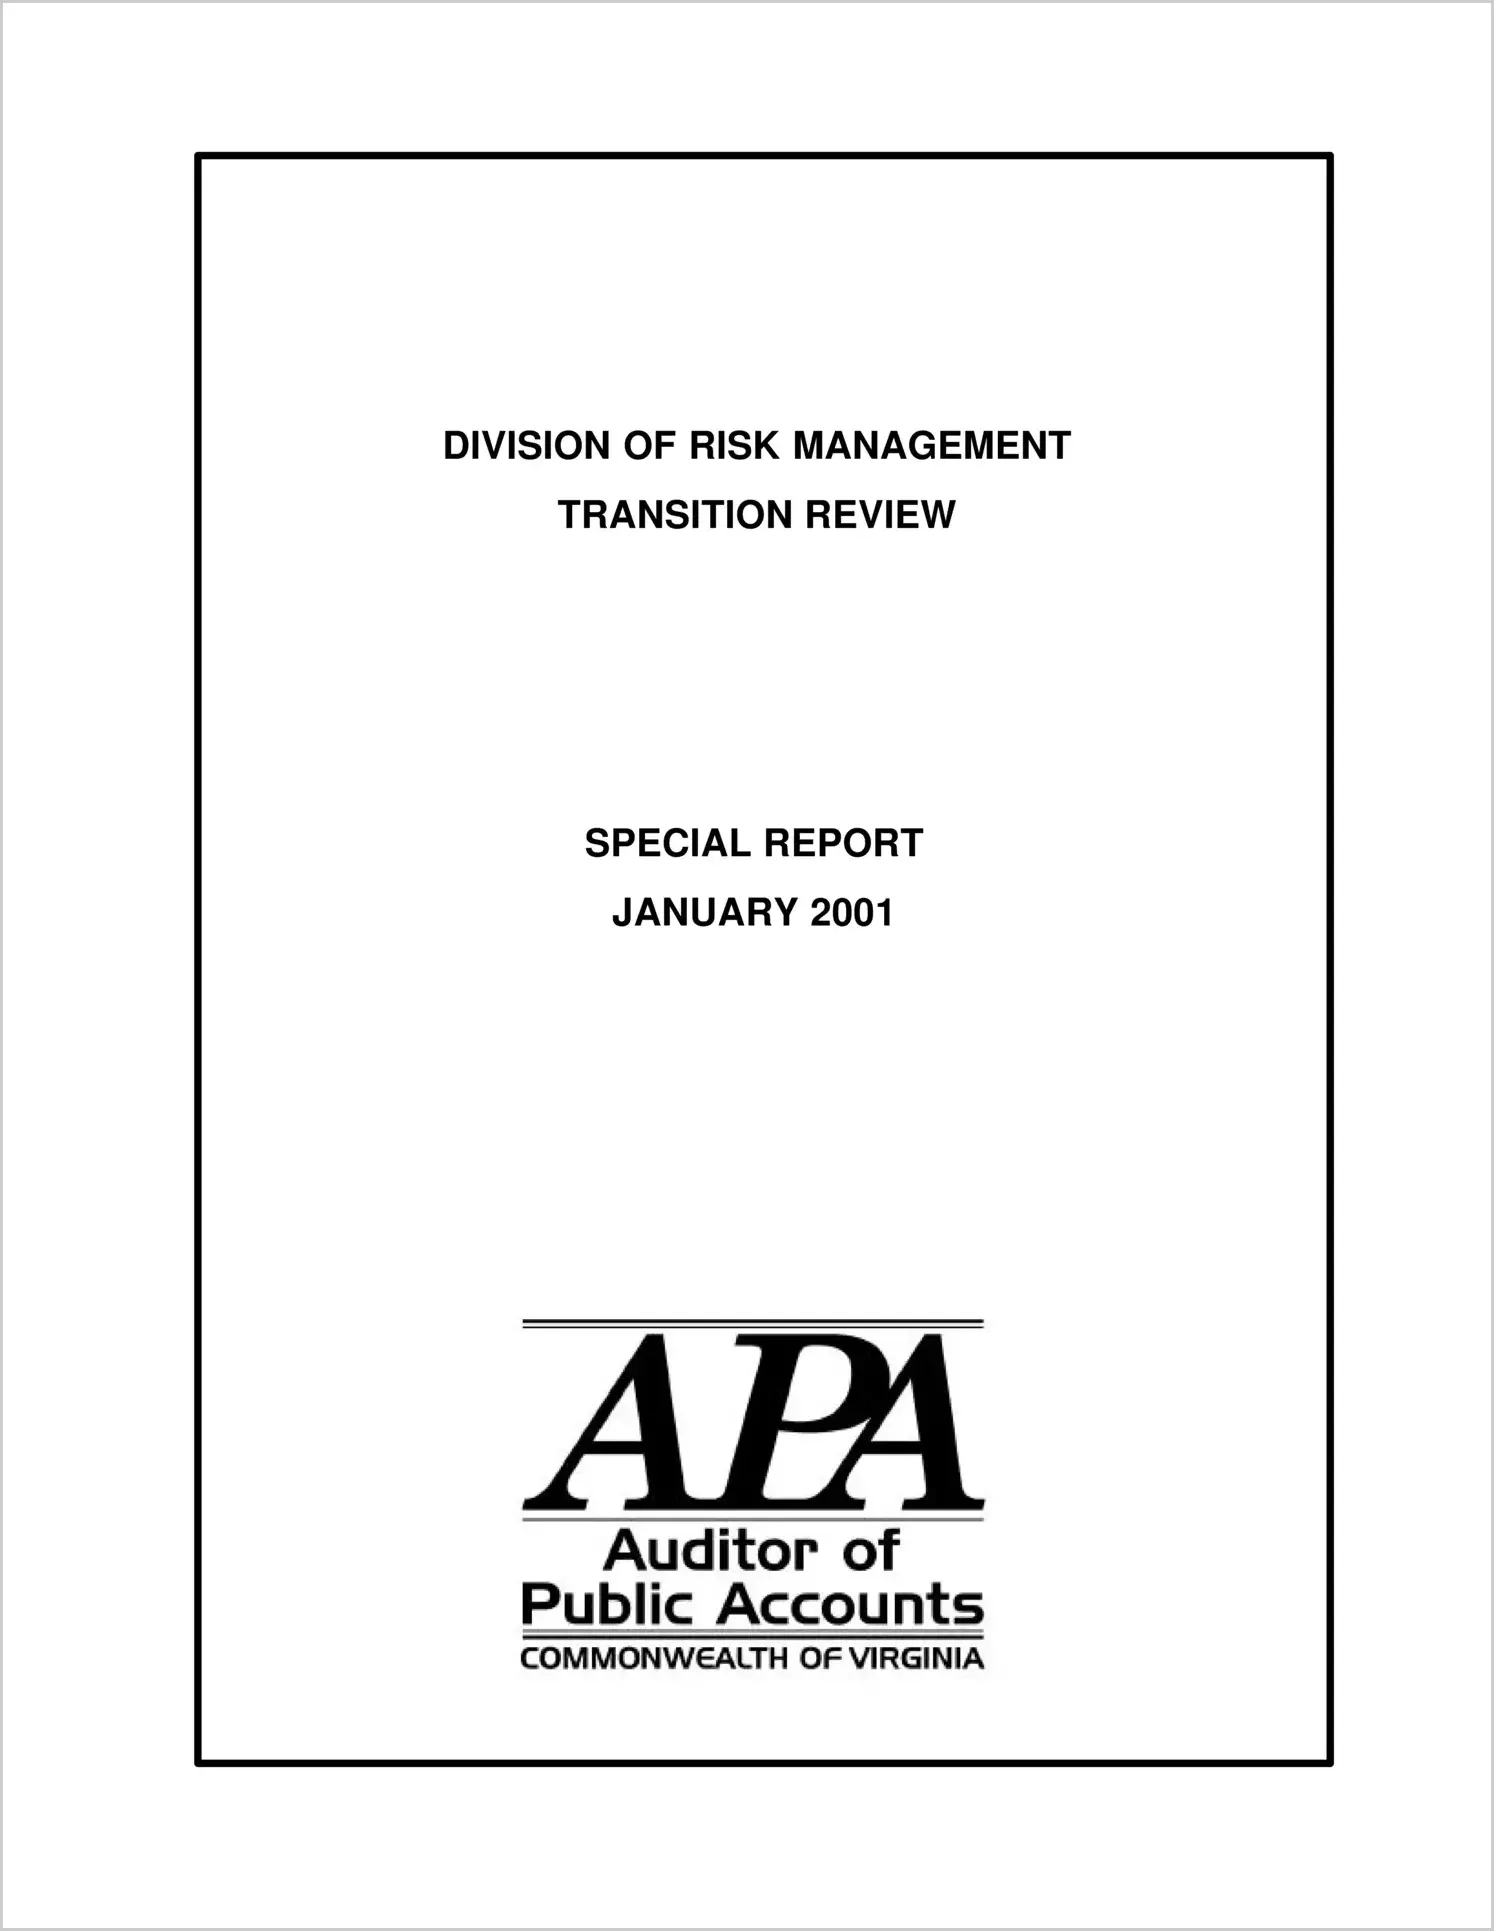 Special ReportDivision of Risk Management Transition Review(Report Date: 1/30/2001)